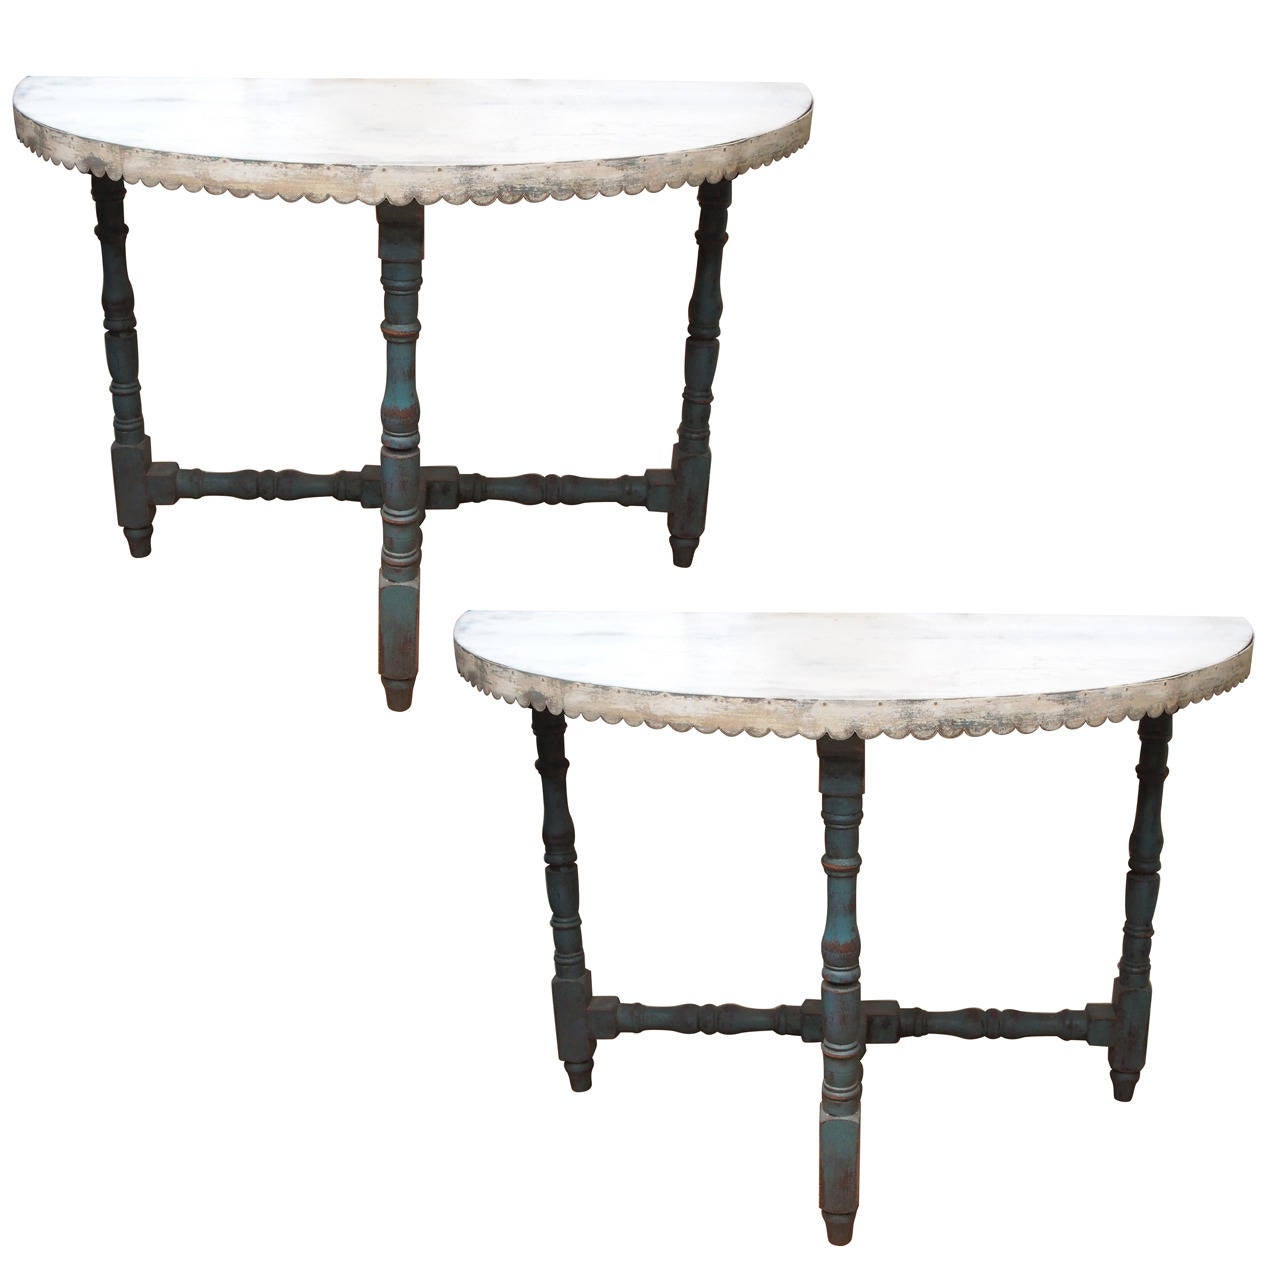 Pair of 19th Century Spanish Demilune Tables with Scalloped Aprons